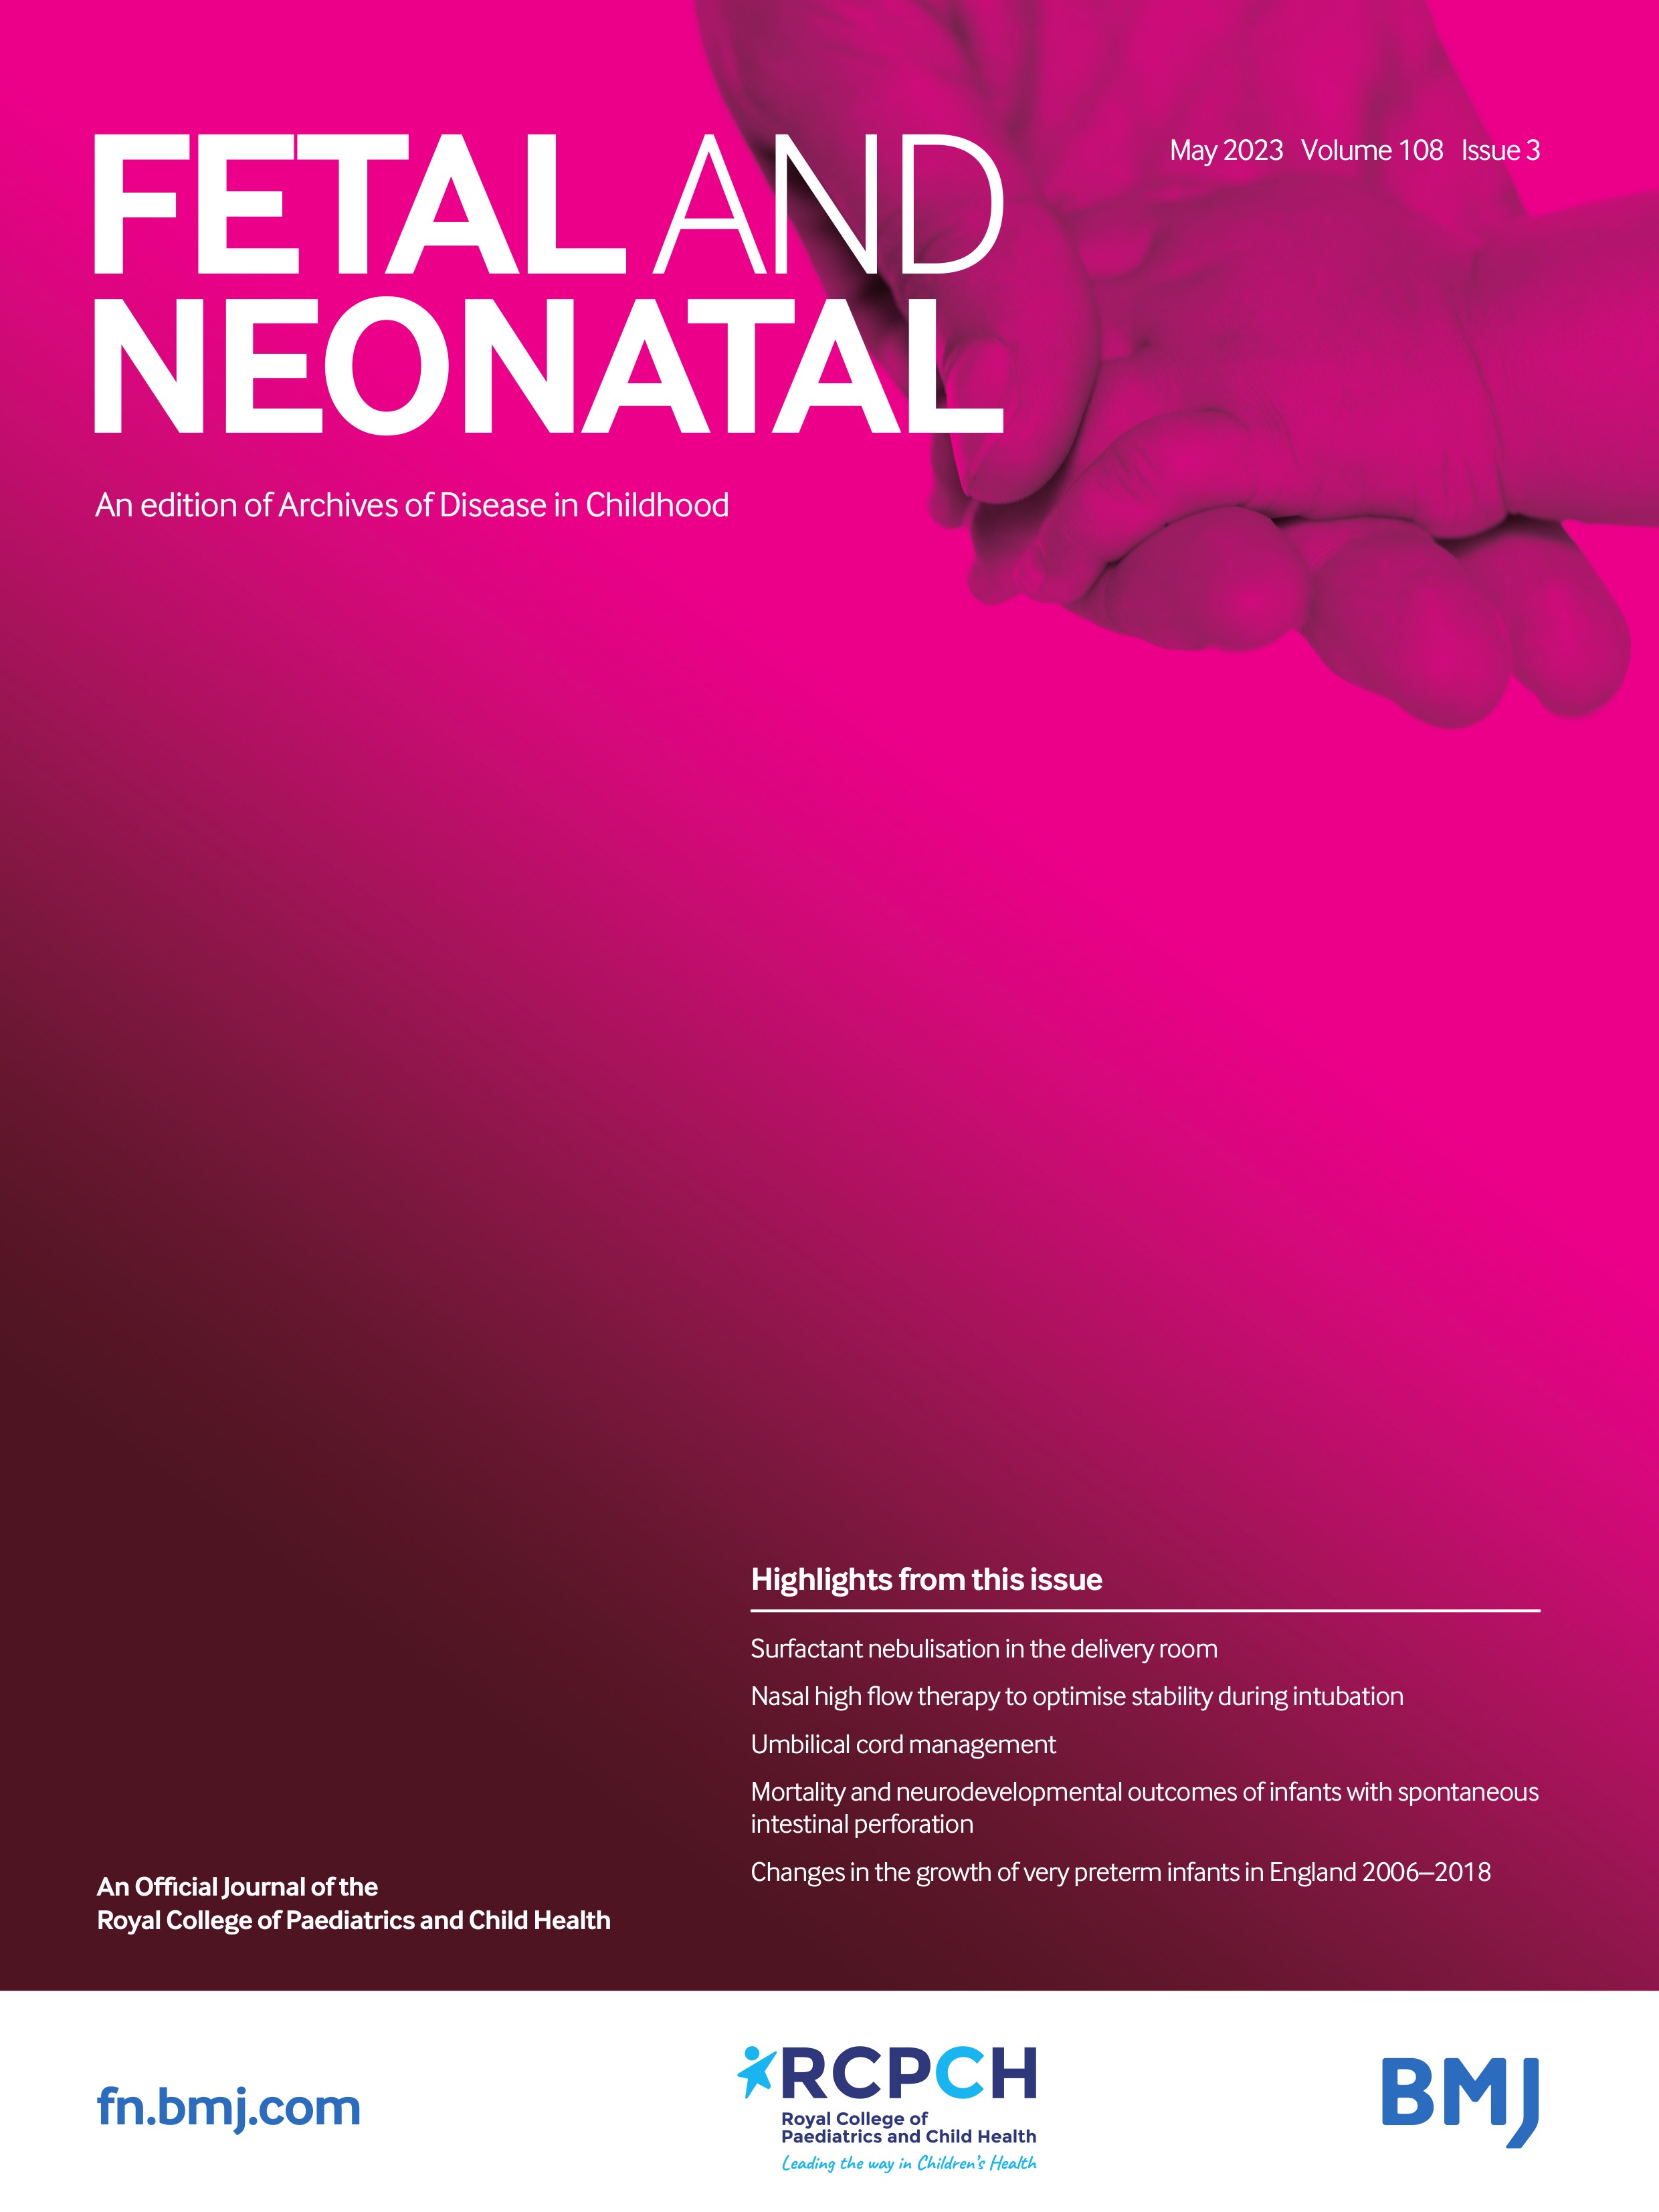 Mortality and neurodevelopmental outcomes of infants with spontaneous intestinal perforation: a systematic review and meta-analysis